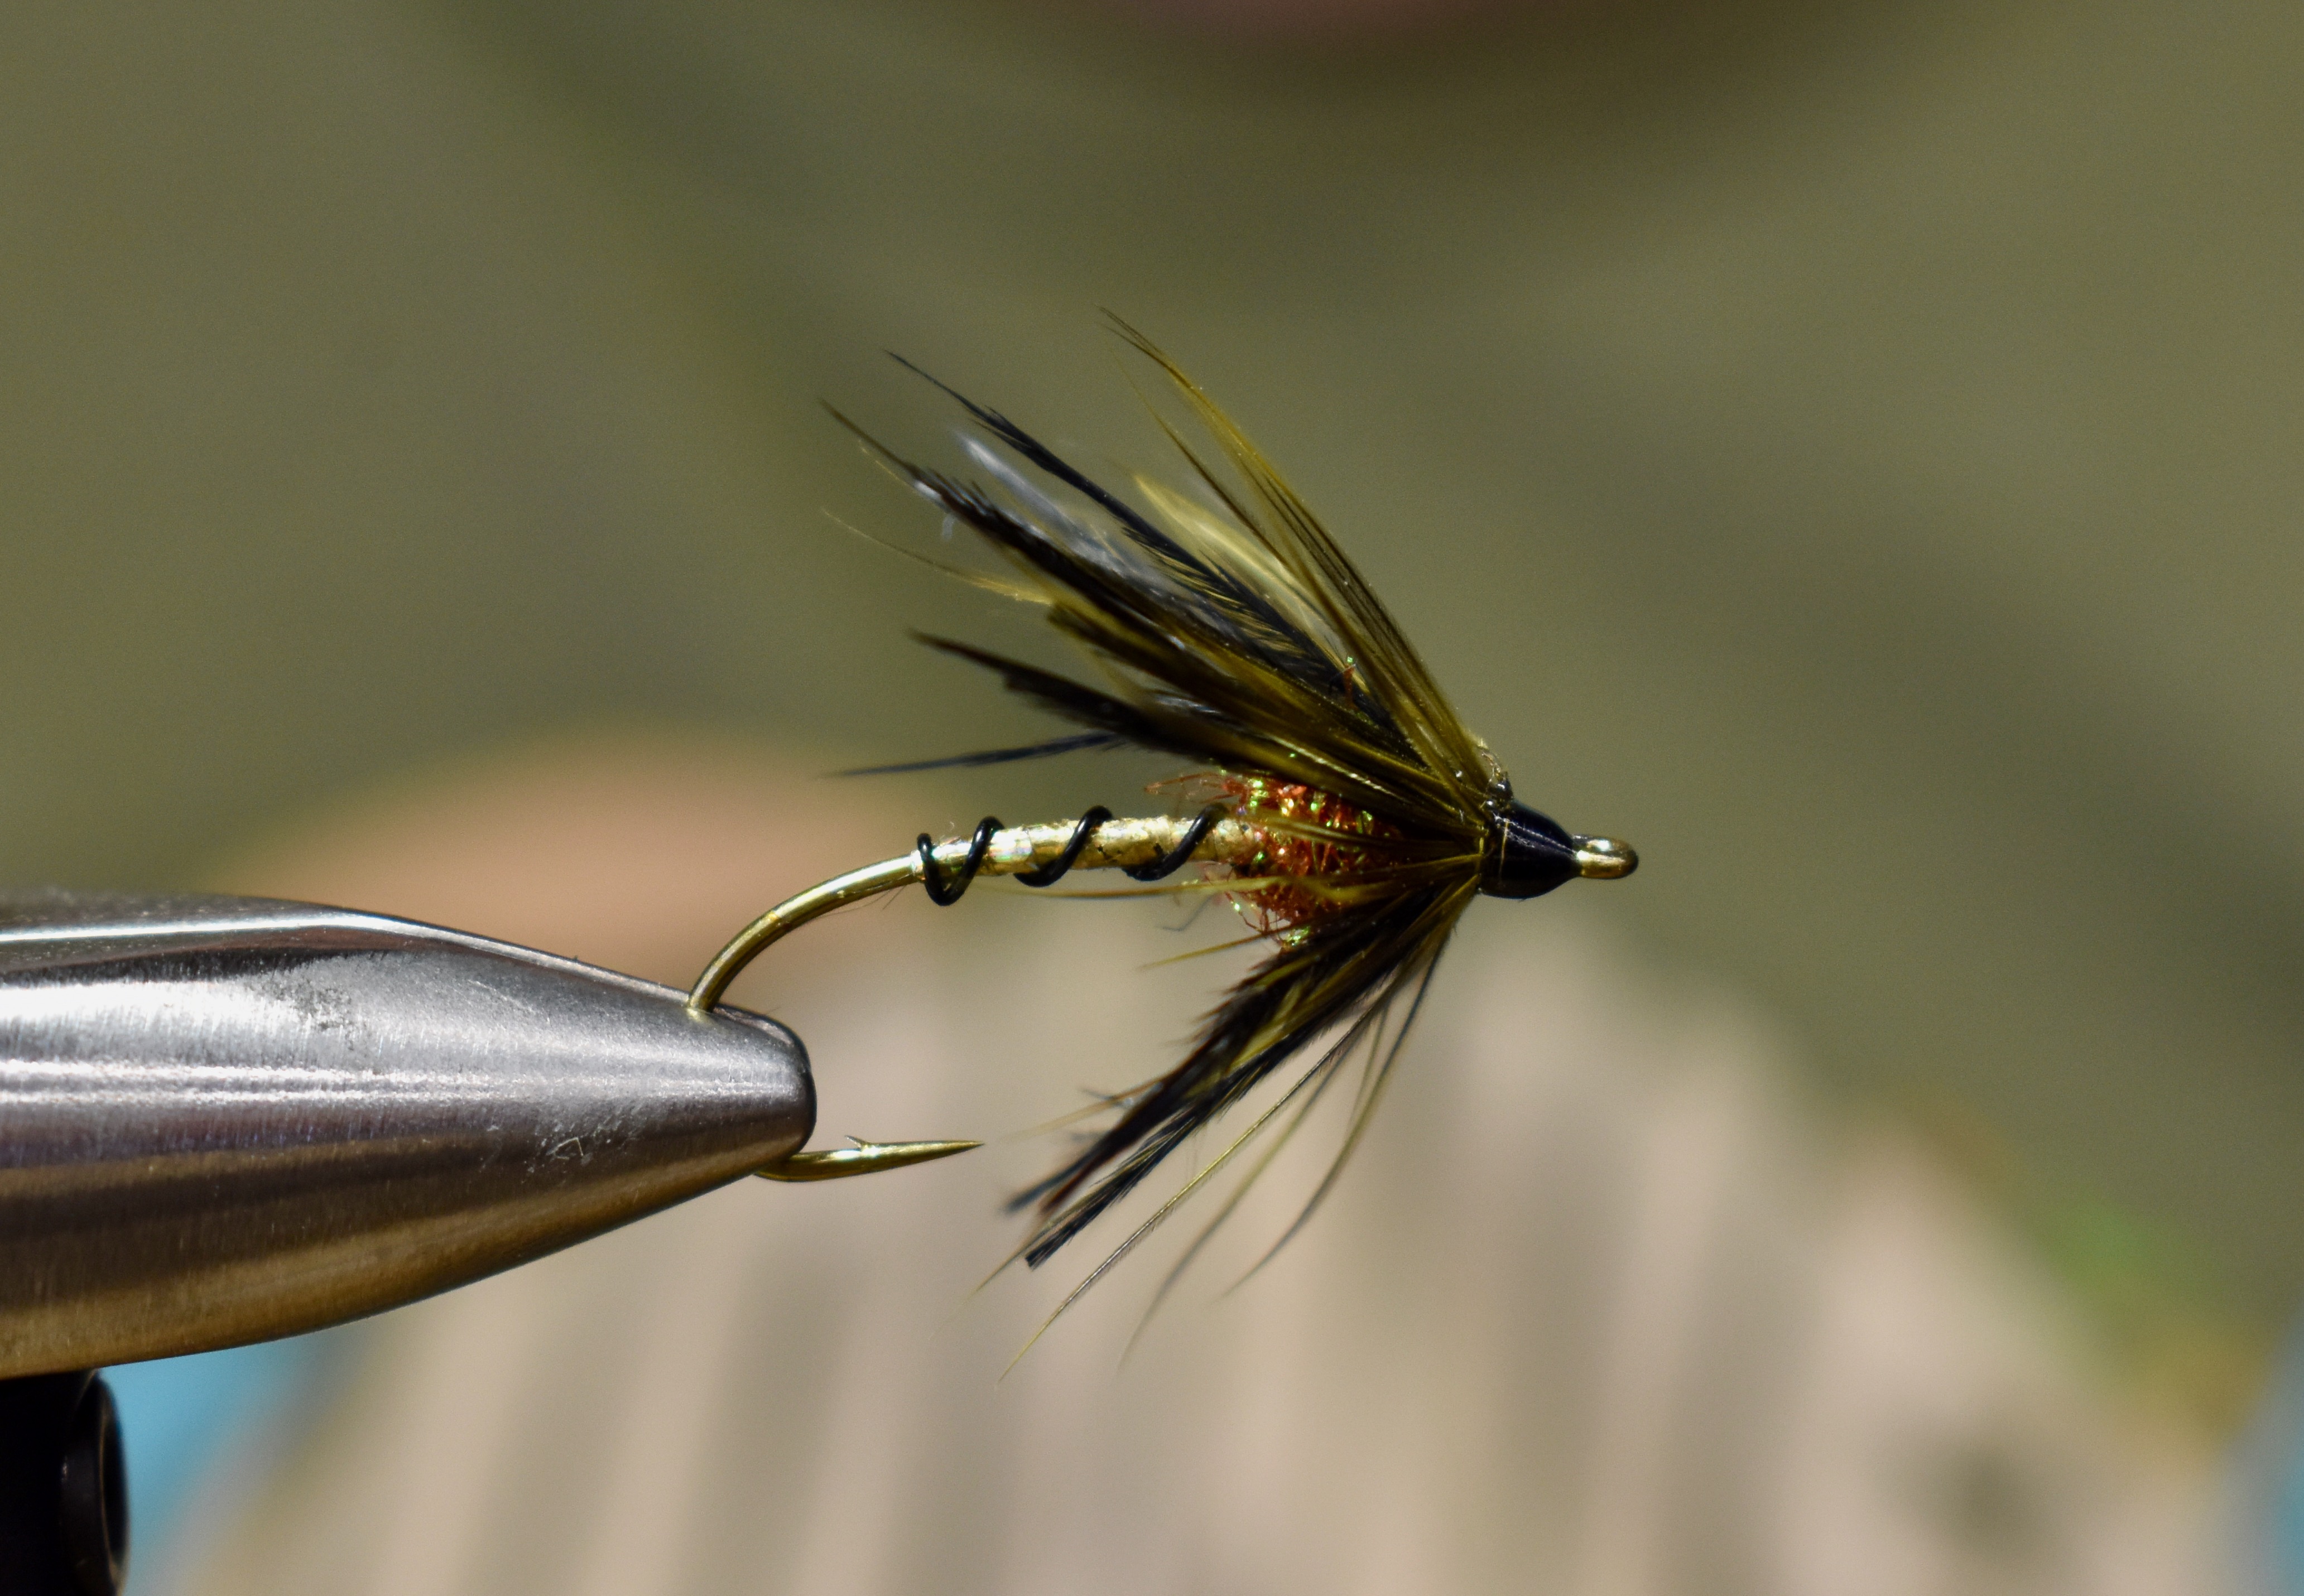 Jim Sens' Trout Spey Soft Hackle Fly  The Caddis Fly: Oregon Fly Fishing  Blog